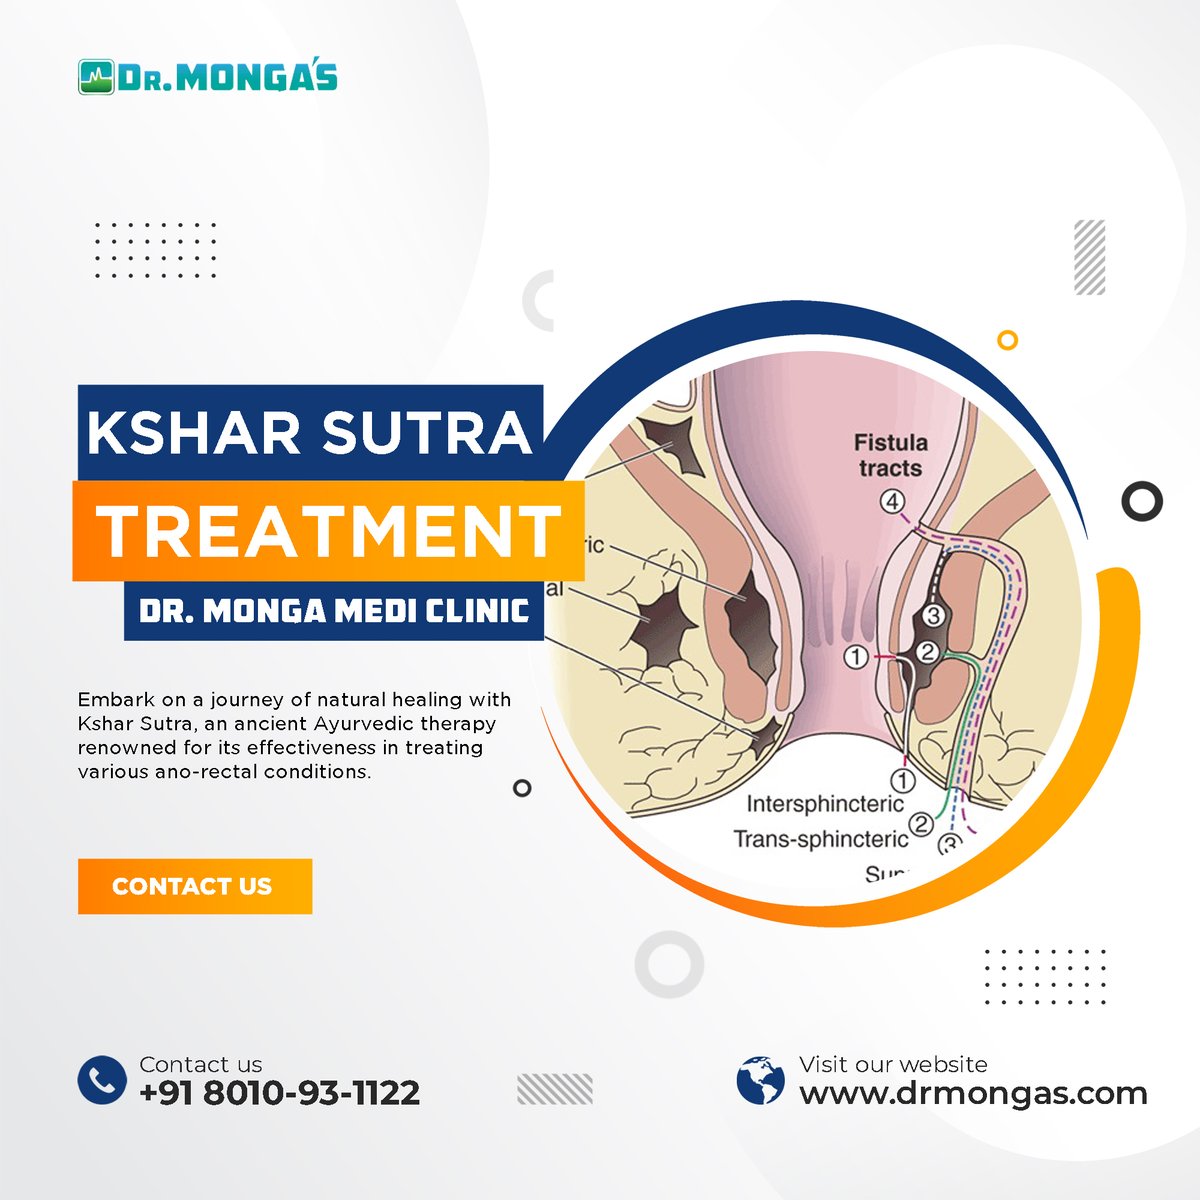 Find the healing power of Kshar Sutra therapy, a minimally invasive Ayurvedic procedure endorsed by Dr. Jyoti Arora. Book your appointment now call +91-8010931122
#piles #constipation #digestion #hemorrhoid #fistulatreatment #ksharsutra #Anorectal #ksharsutra #fissure #fistula